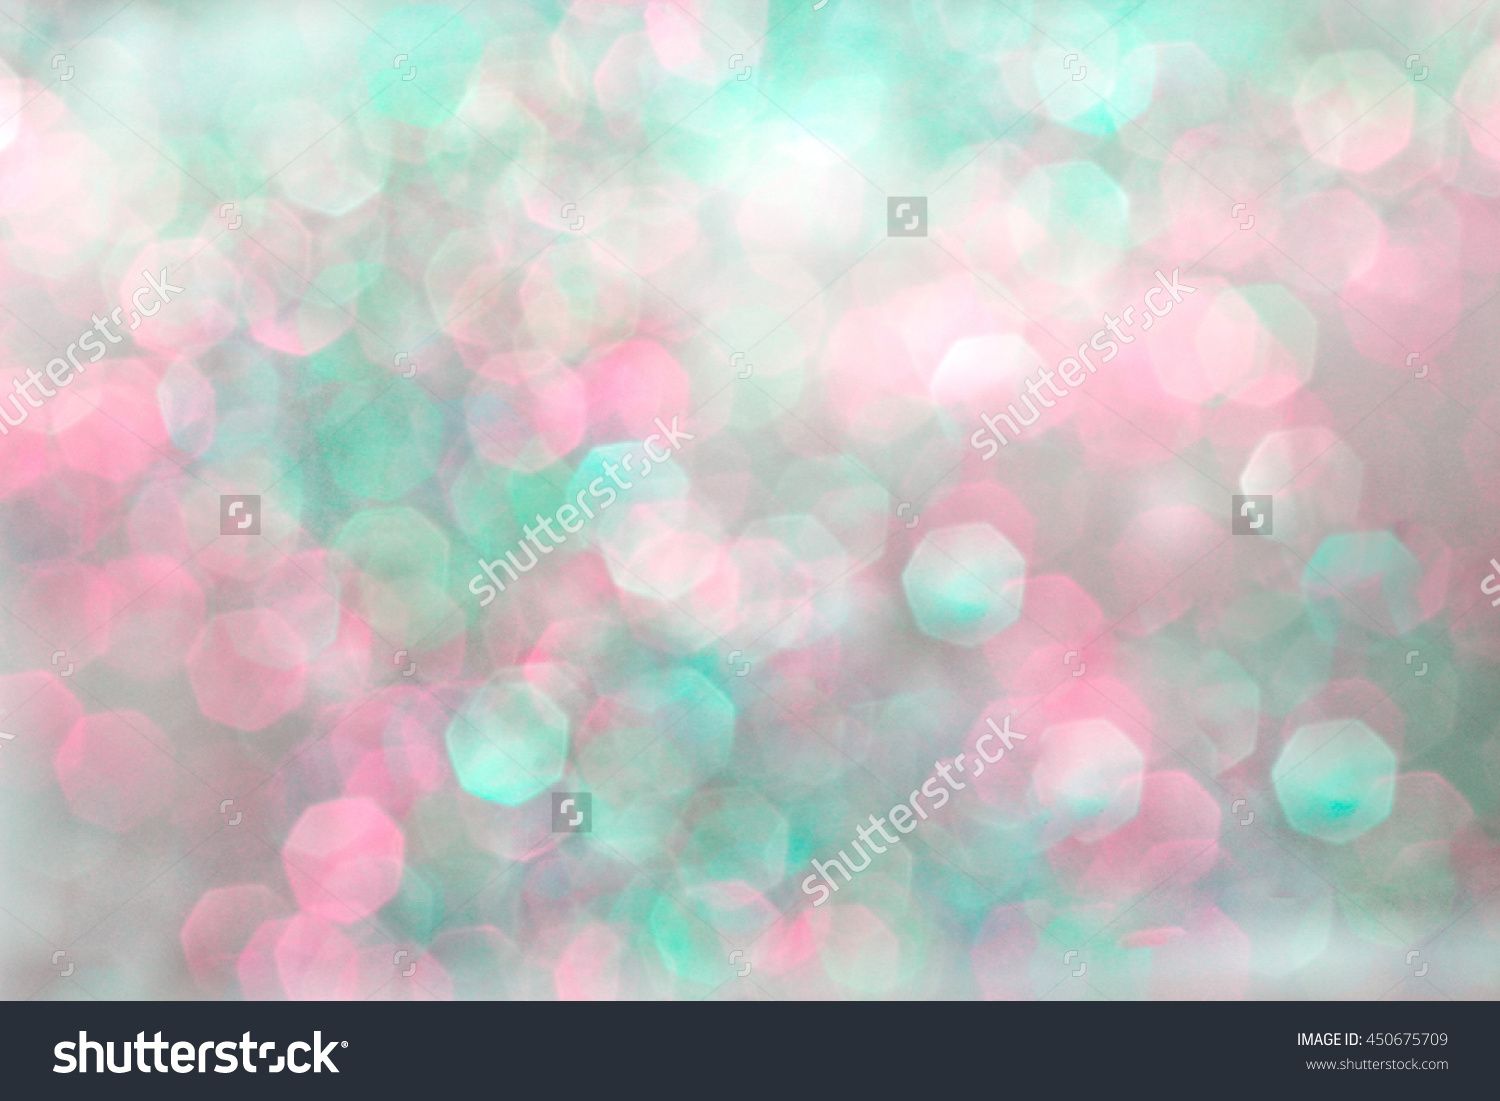 Blurred Pink And Blue Gliiter Abstract Defocused Bokeh Background